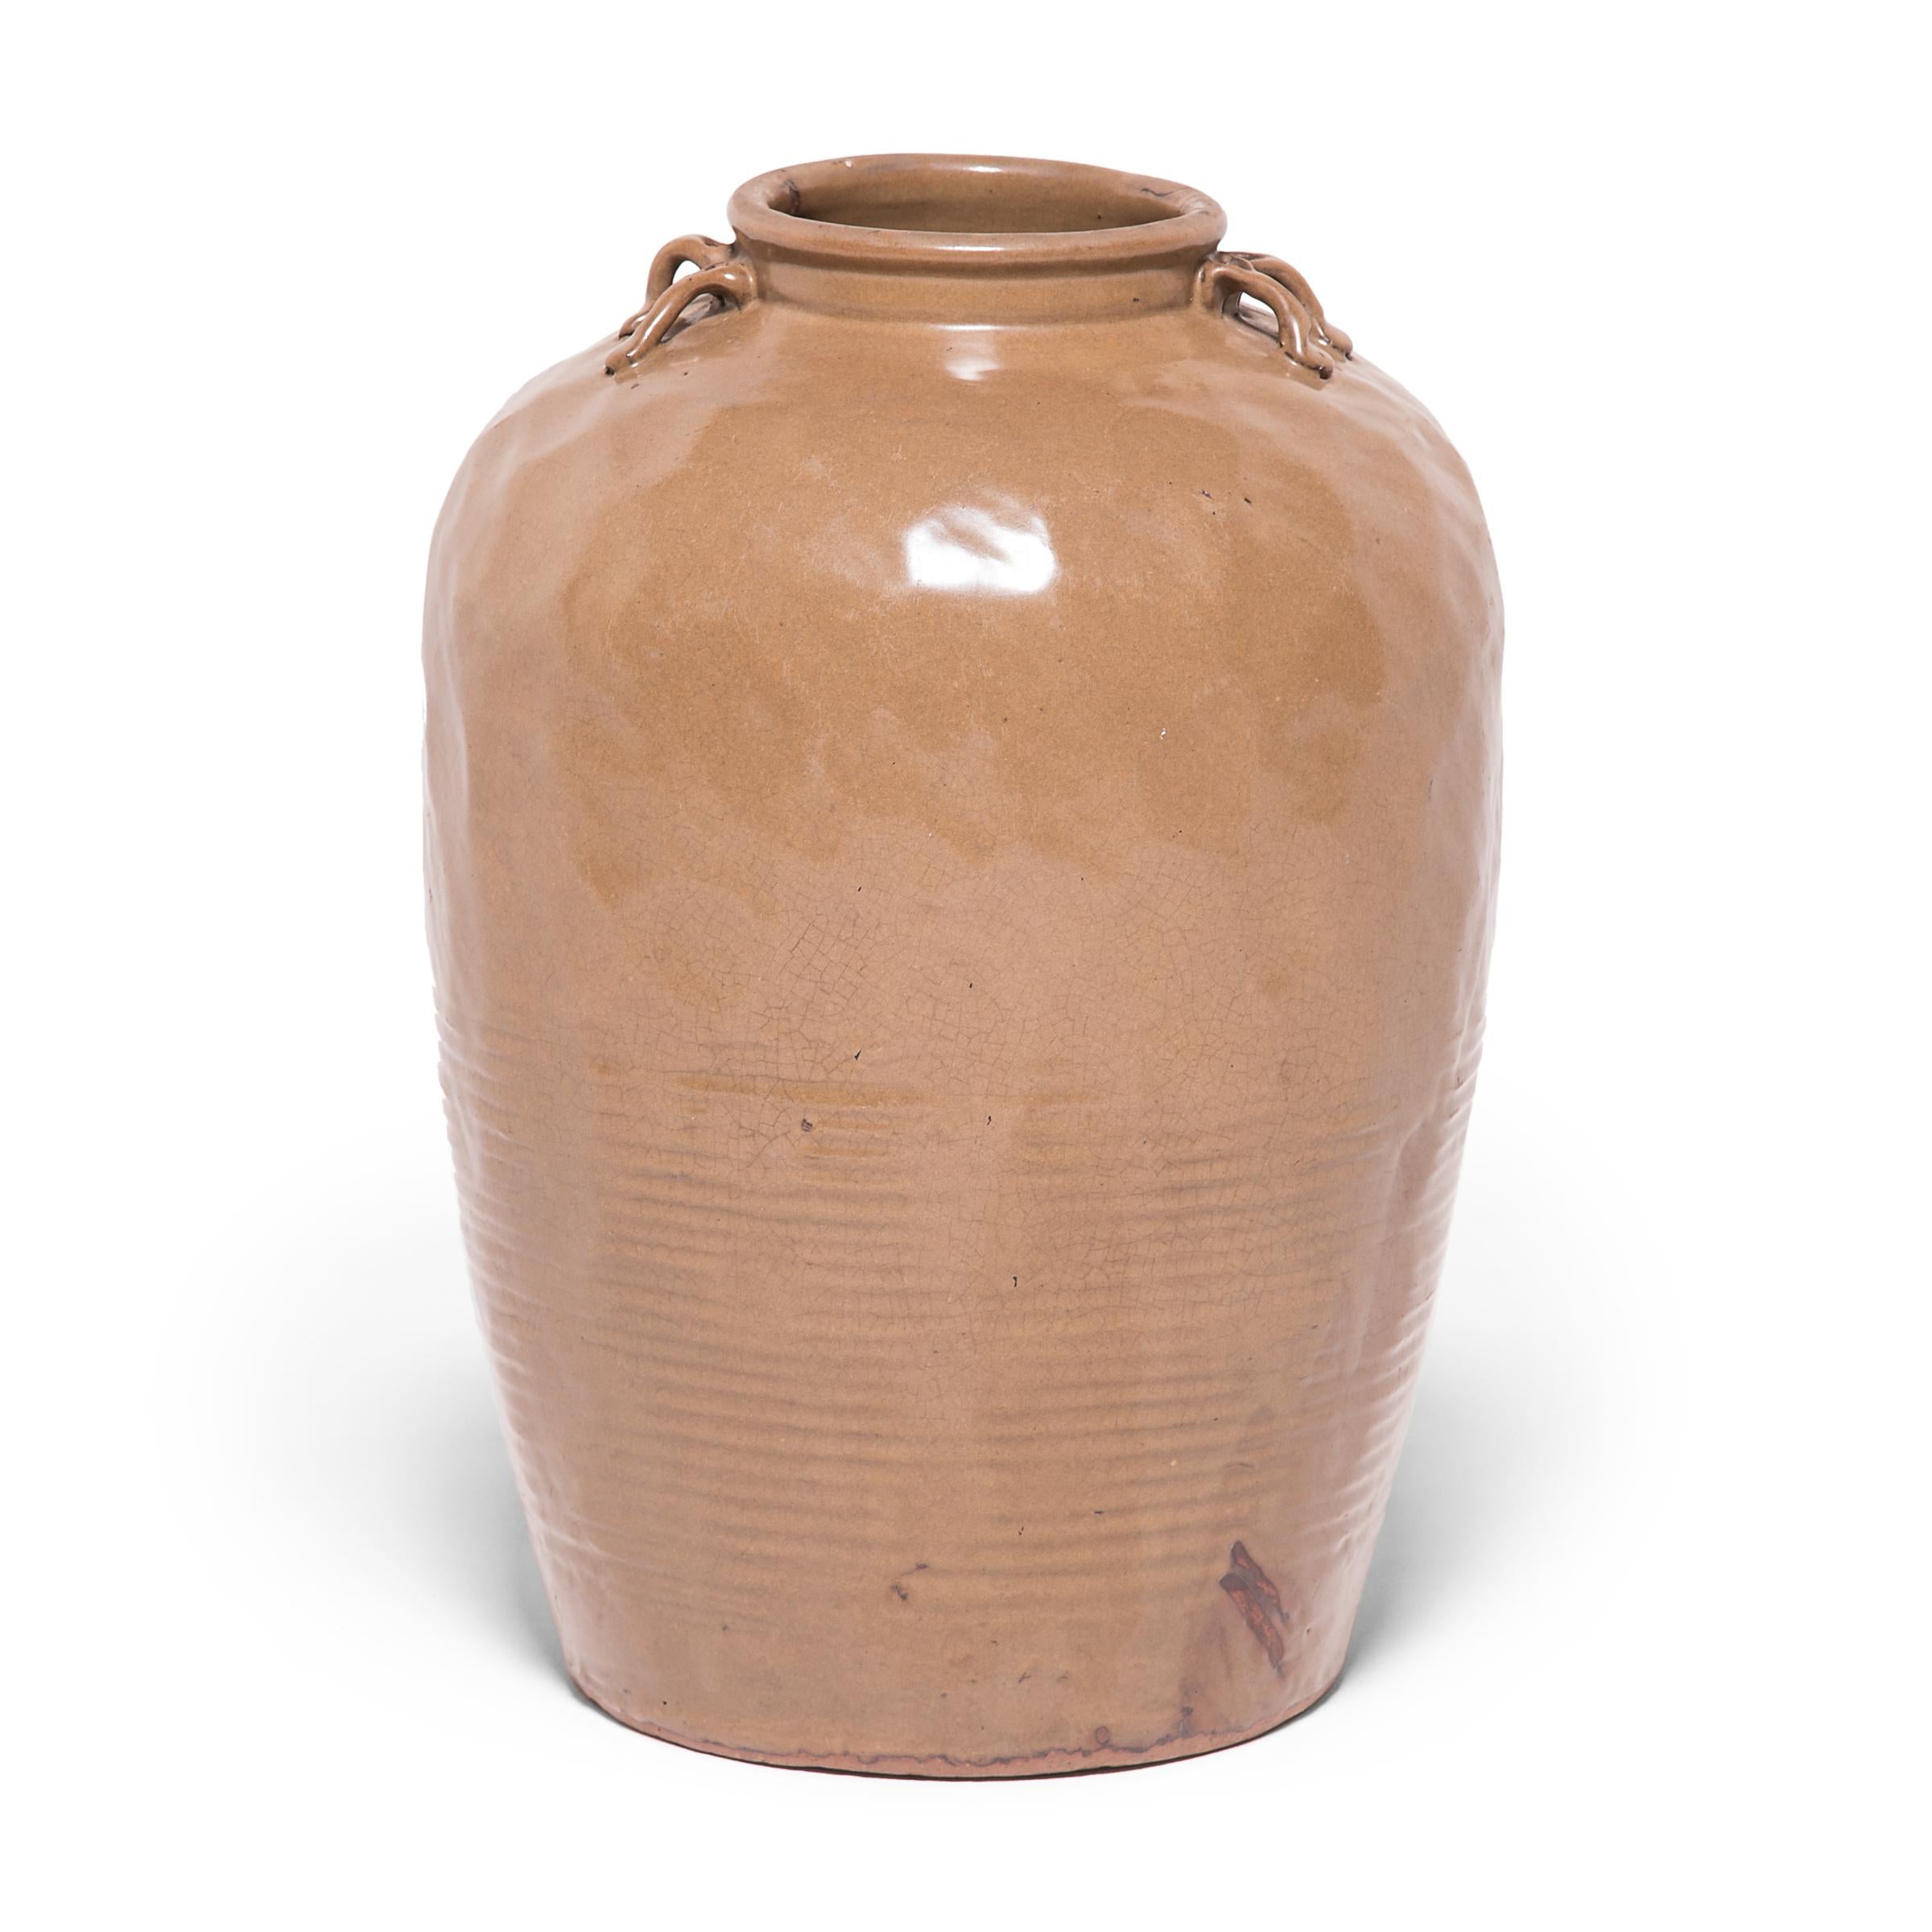 In 19th century China jars like this would have held wines, foods, and other consumable items. The combination of an irregular surface with a subtle ridged pattern along the side gives this tall vessel an understated sculptural presence. Spots of